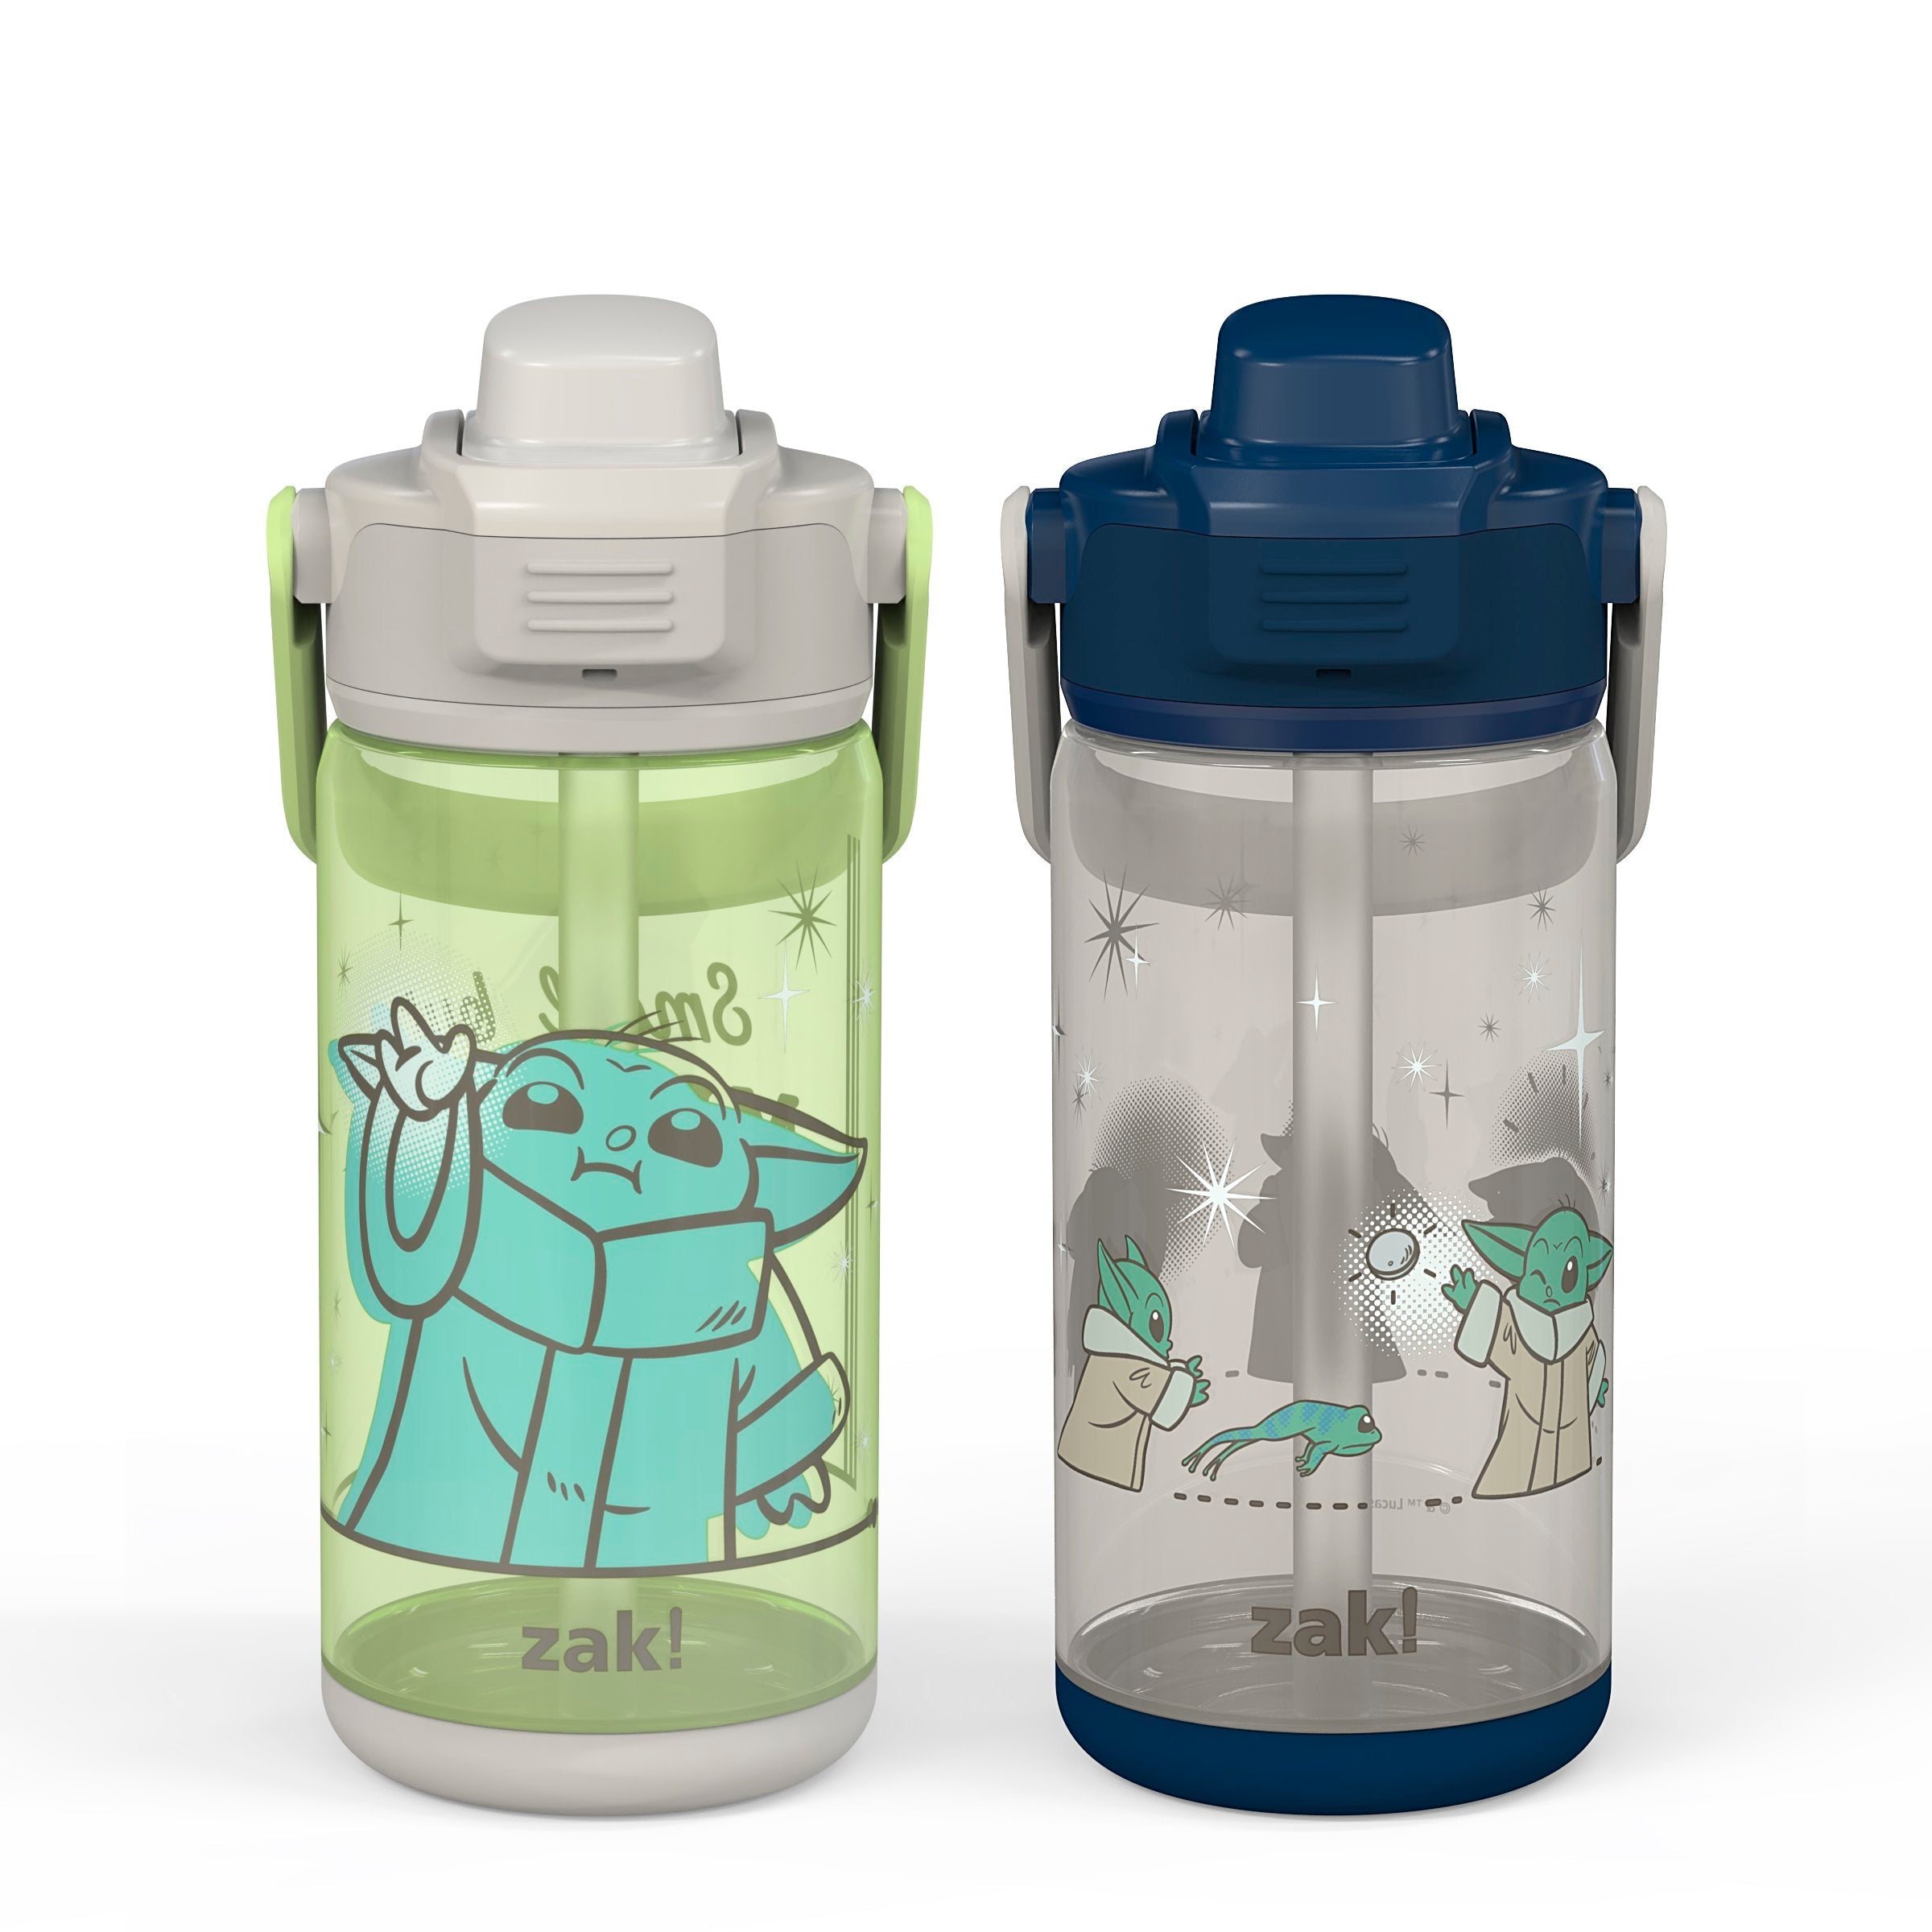 Zak Designs Star Wars The Mandalorian Double Wall Tumbler with  Lid and Straw Made of Break-Resistant Plastic (Baby Yoda/The Child, 13oz,  BPA Free) (SWSD-V540): Tumblers & Water Glasses